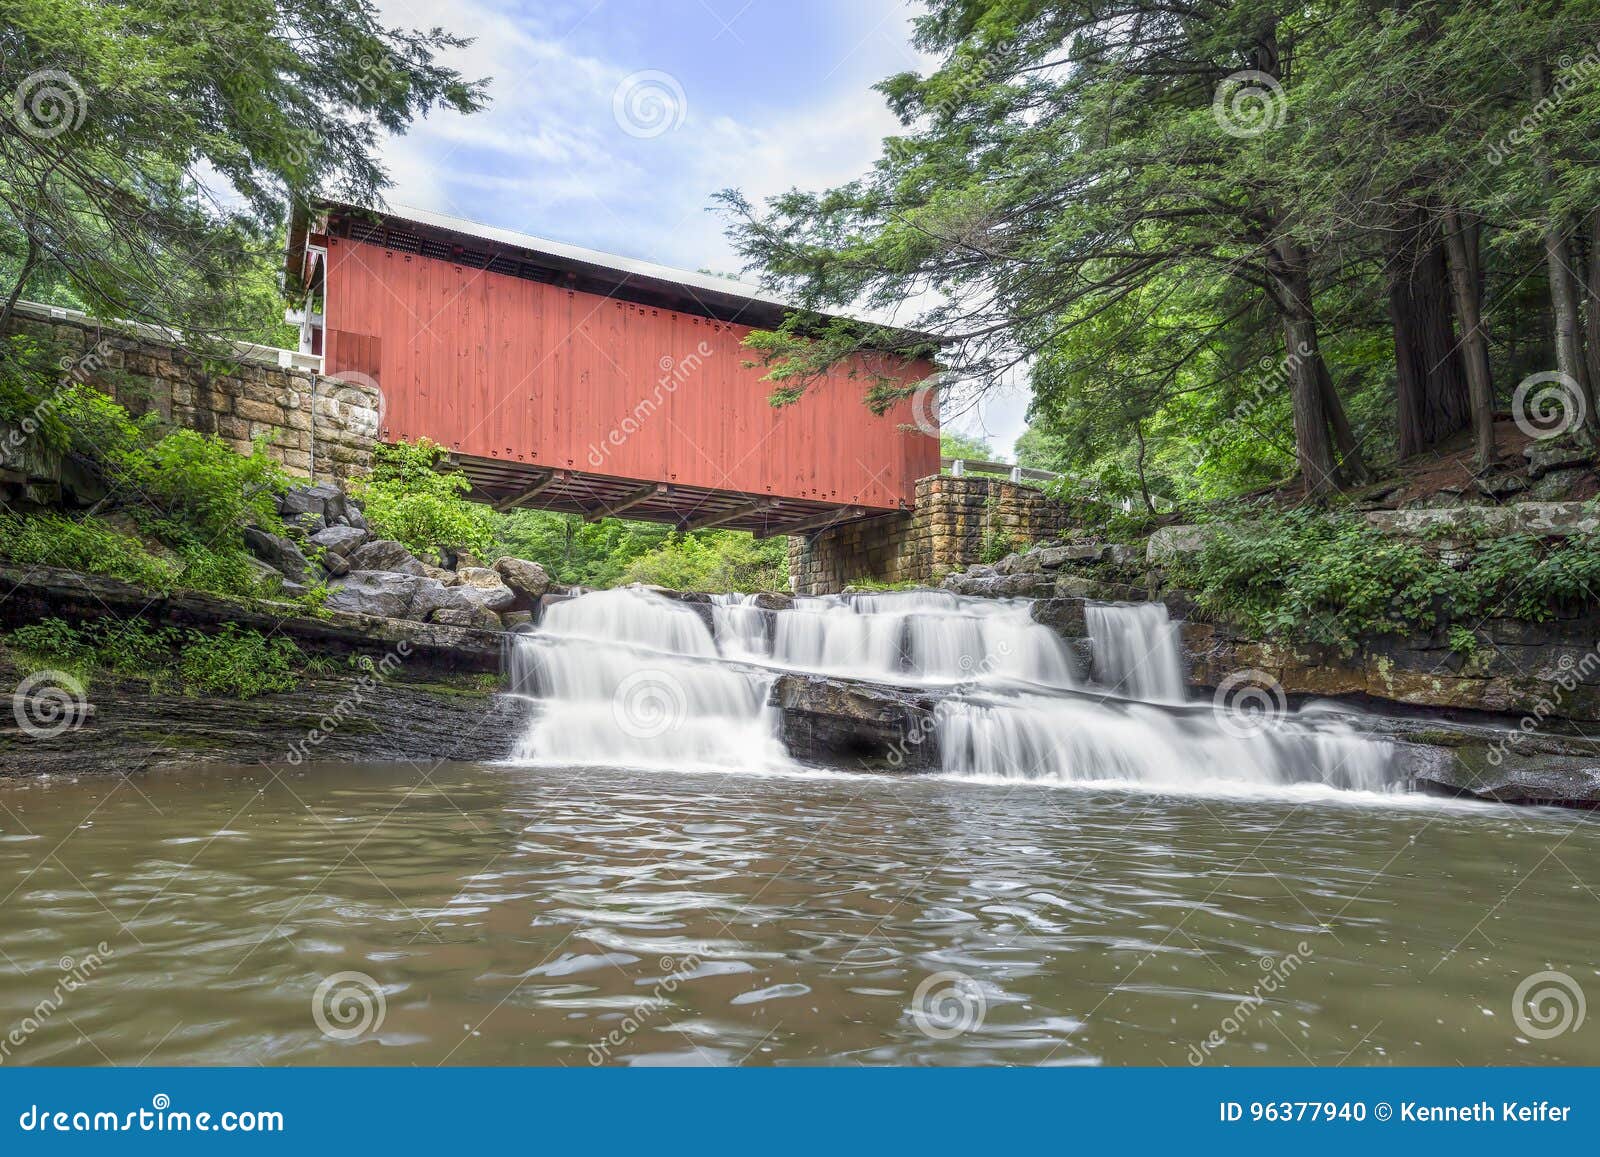 Packsaddle Covered Bridge And Waterfall Stock Photo Image Of